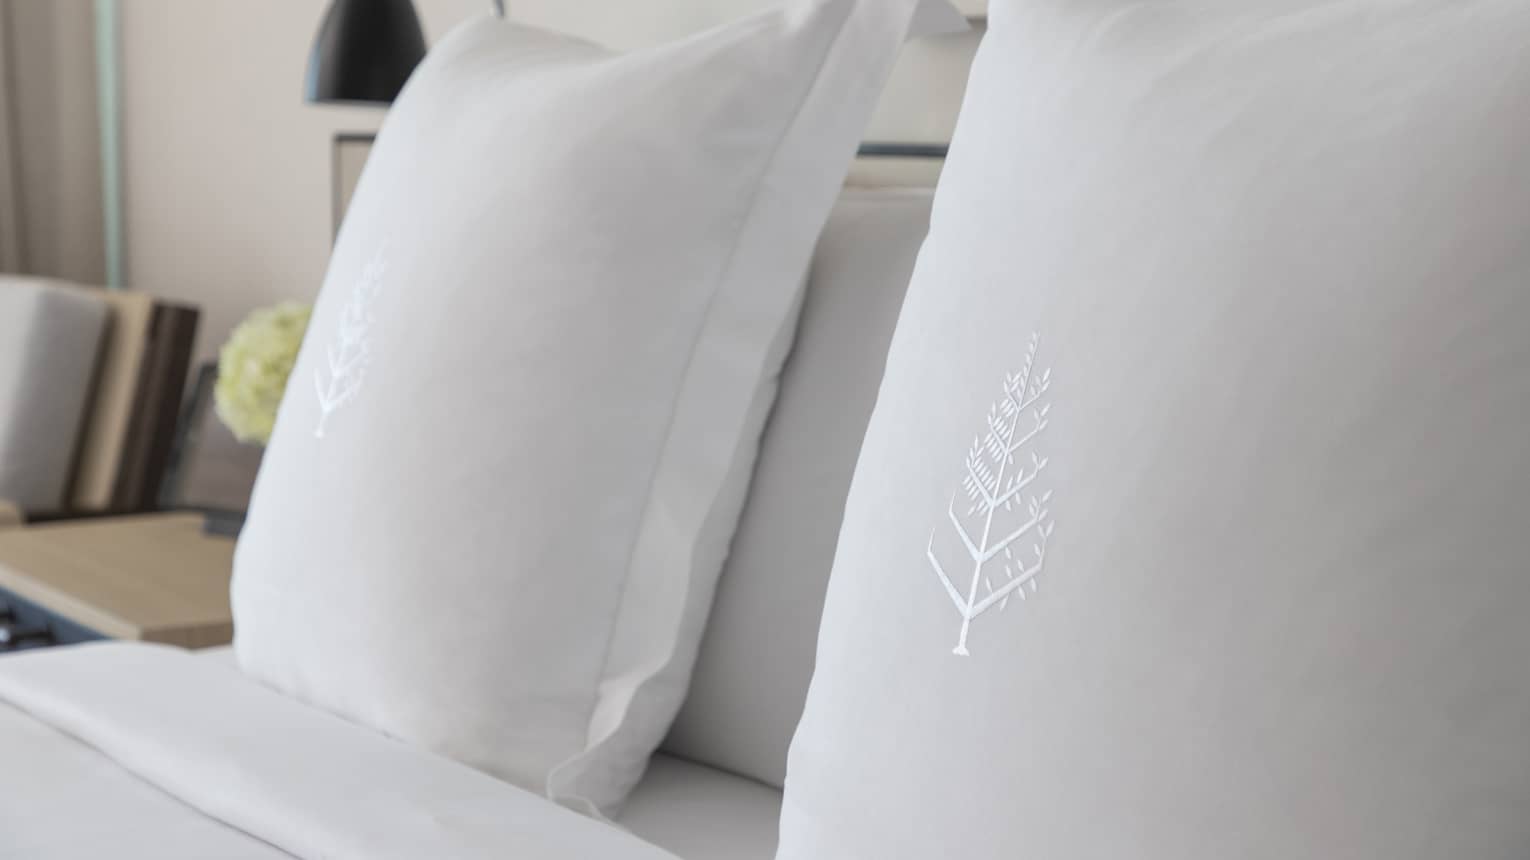 Two white sham pillows on bed with embroidered Four Seasons logos